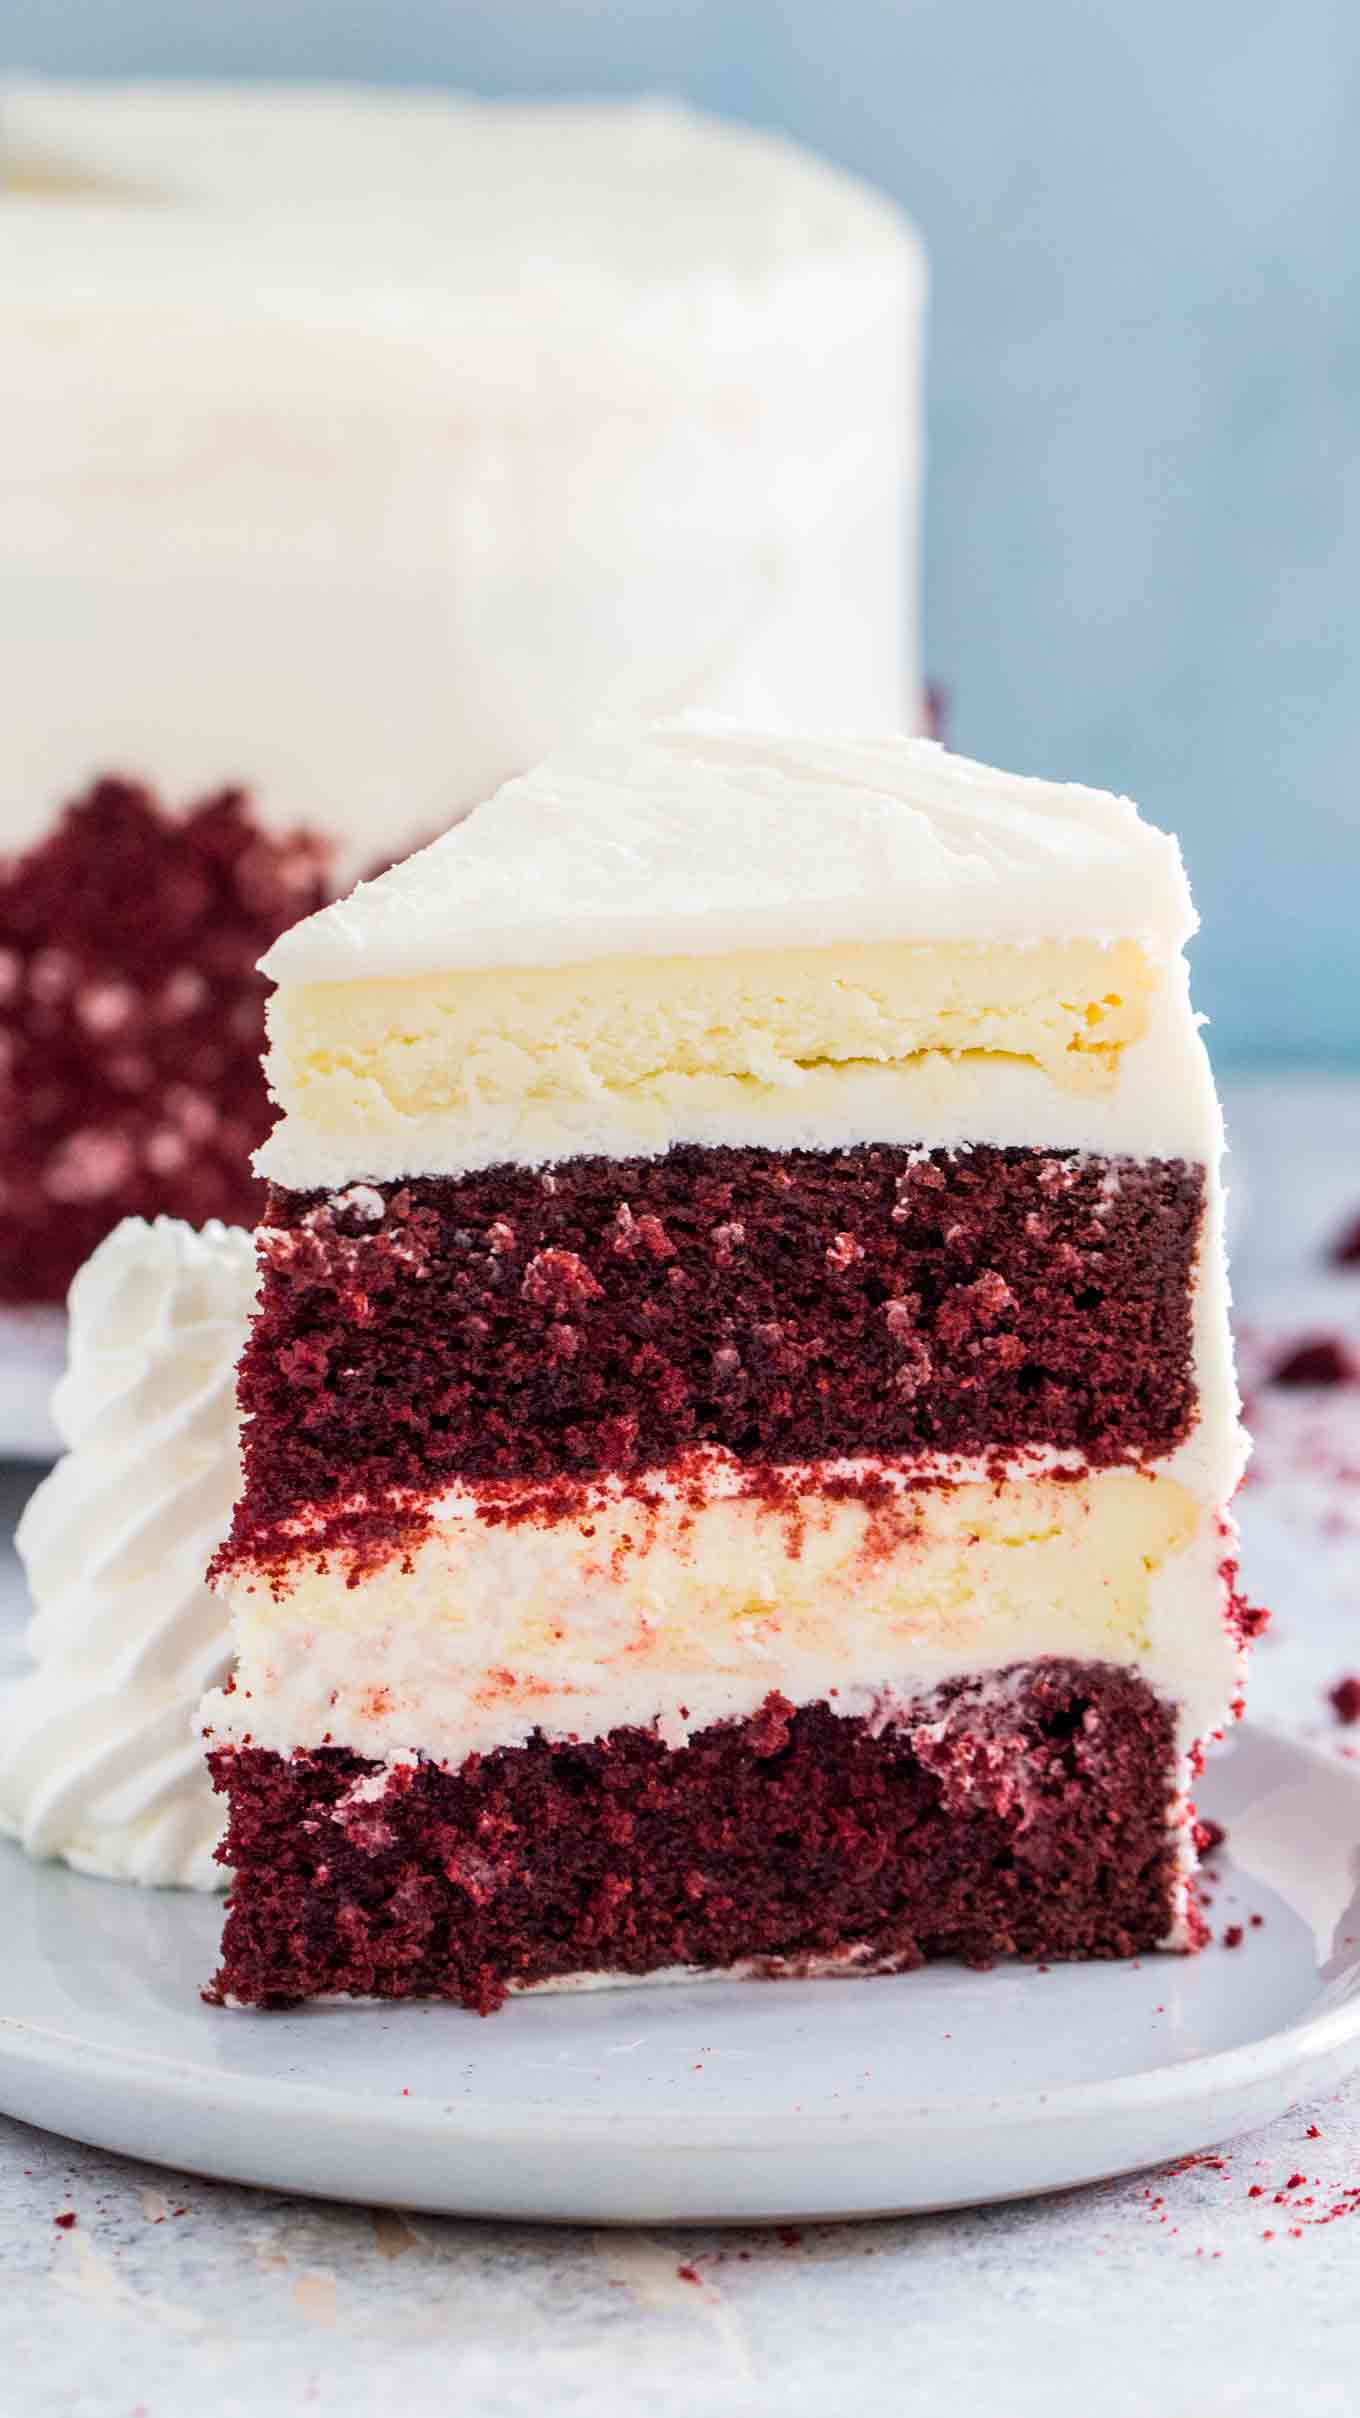 Best Red Velvet Cake Recipe [VIDEO] - Sweet and Savory Meals